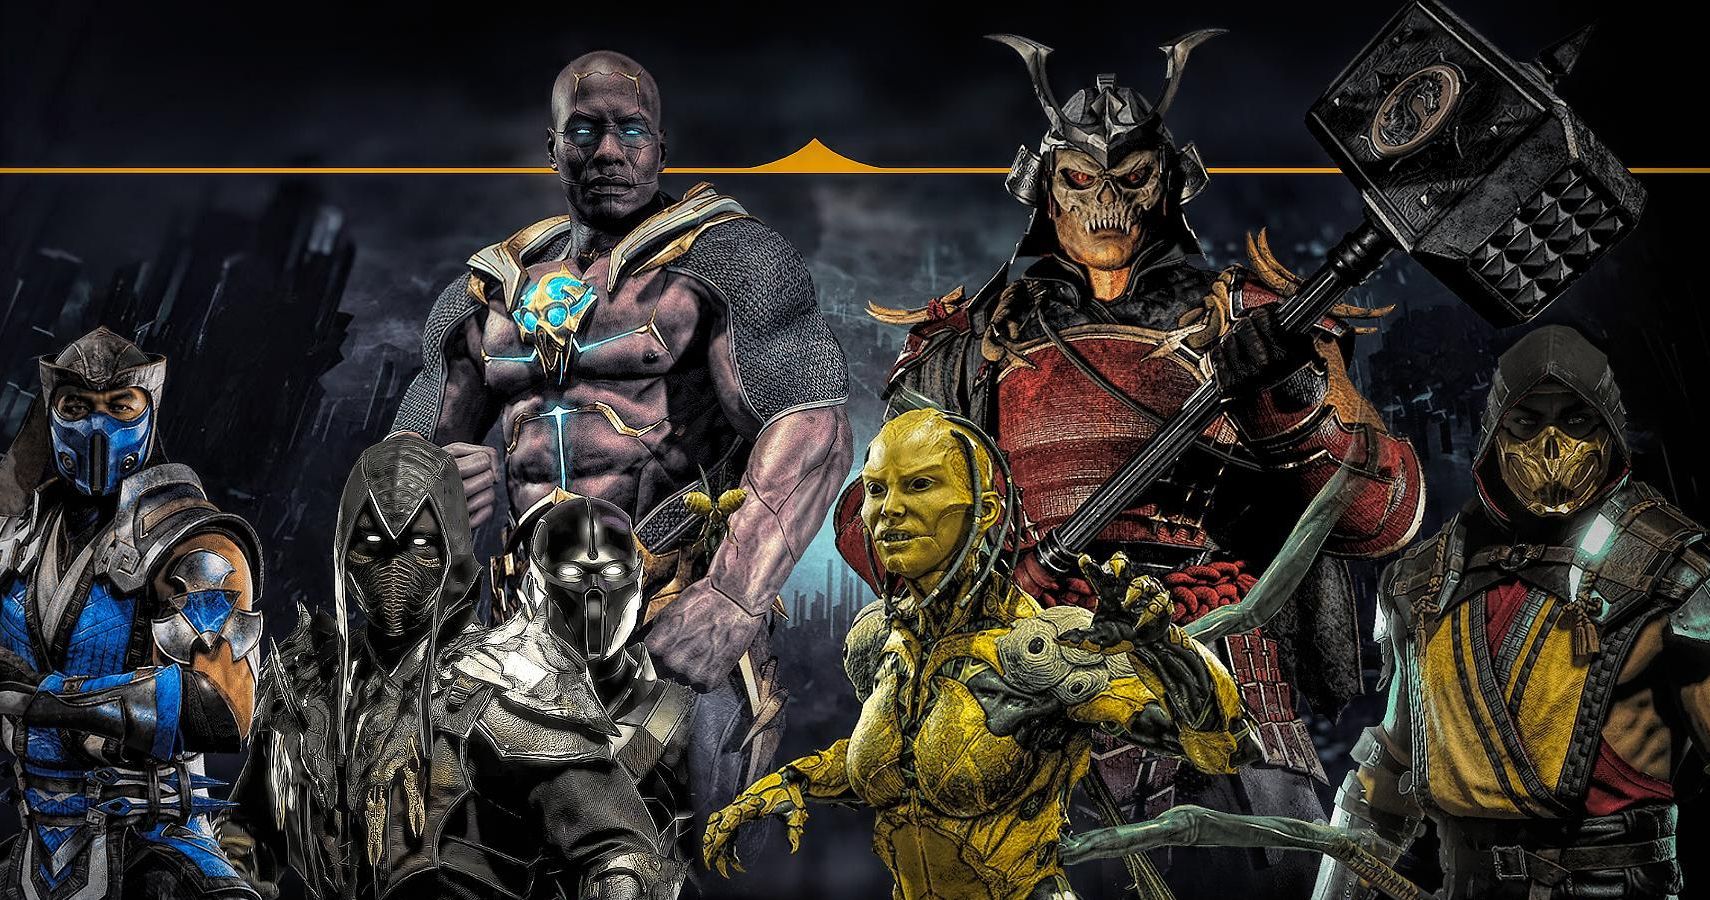 Mortal Kombat 11 at EVO 2019 What Characters We Expect To See On Top